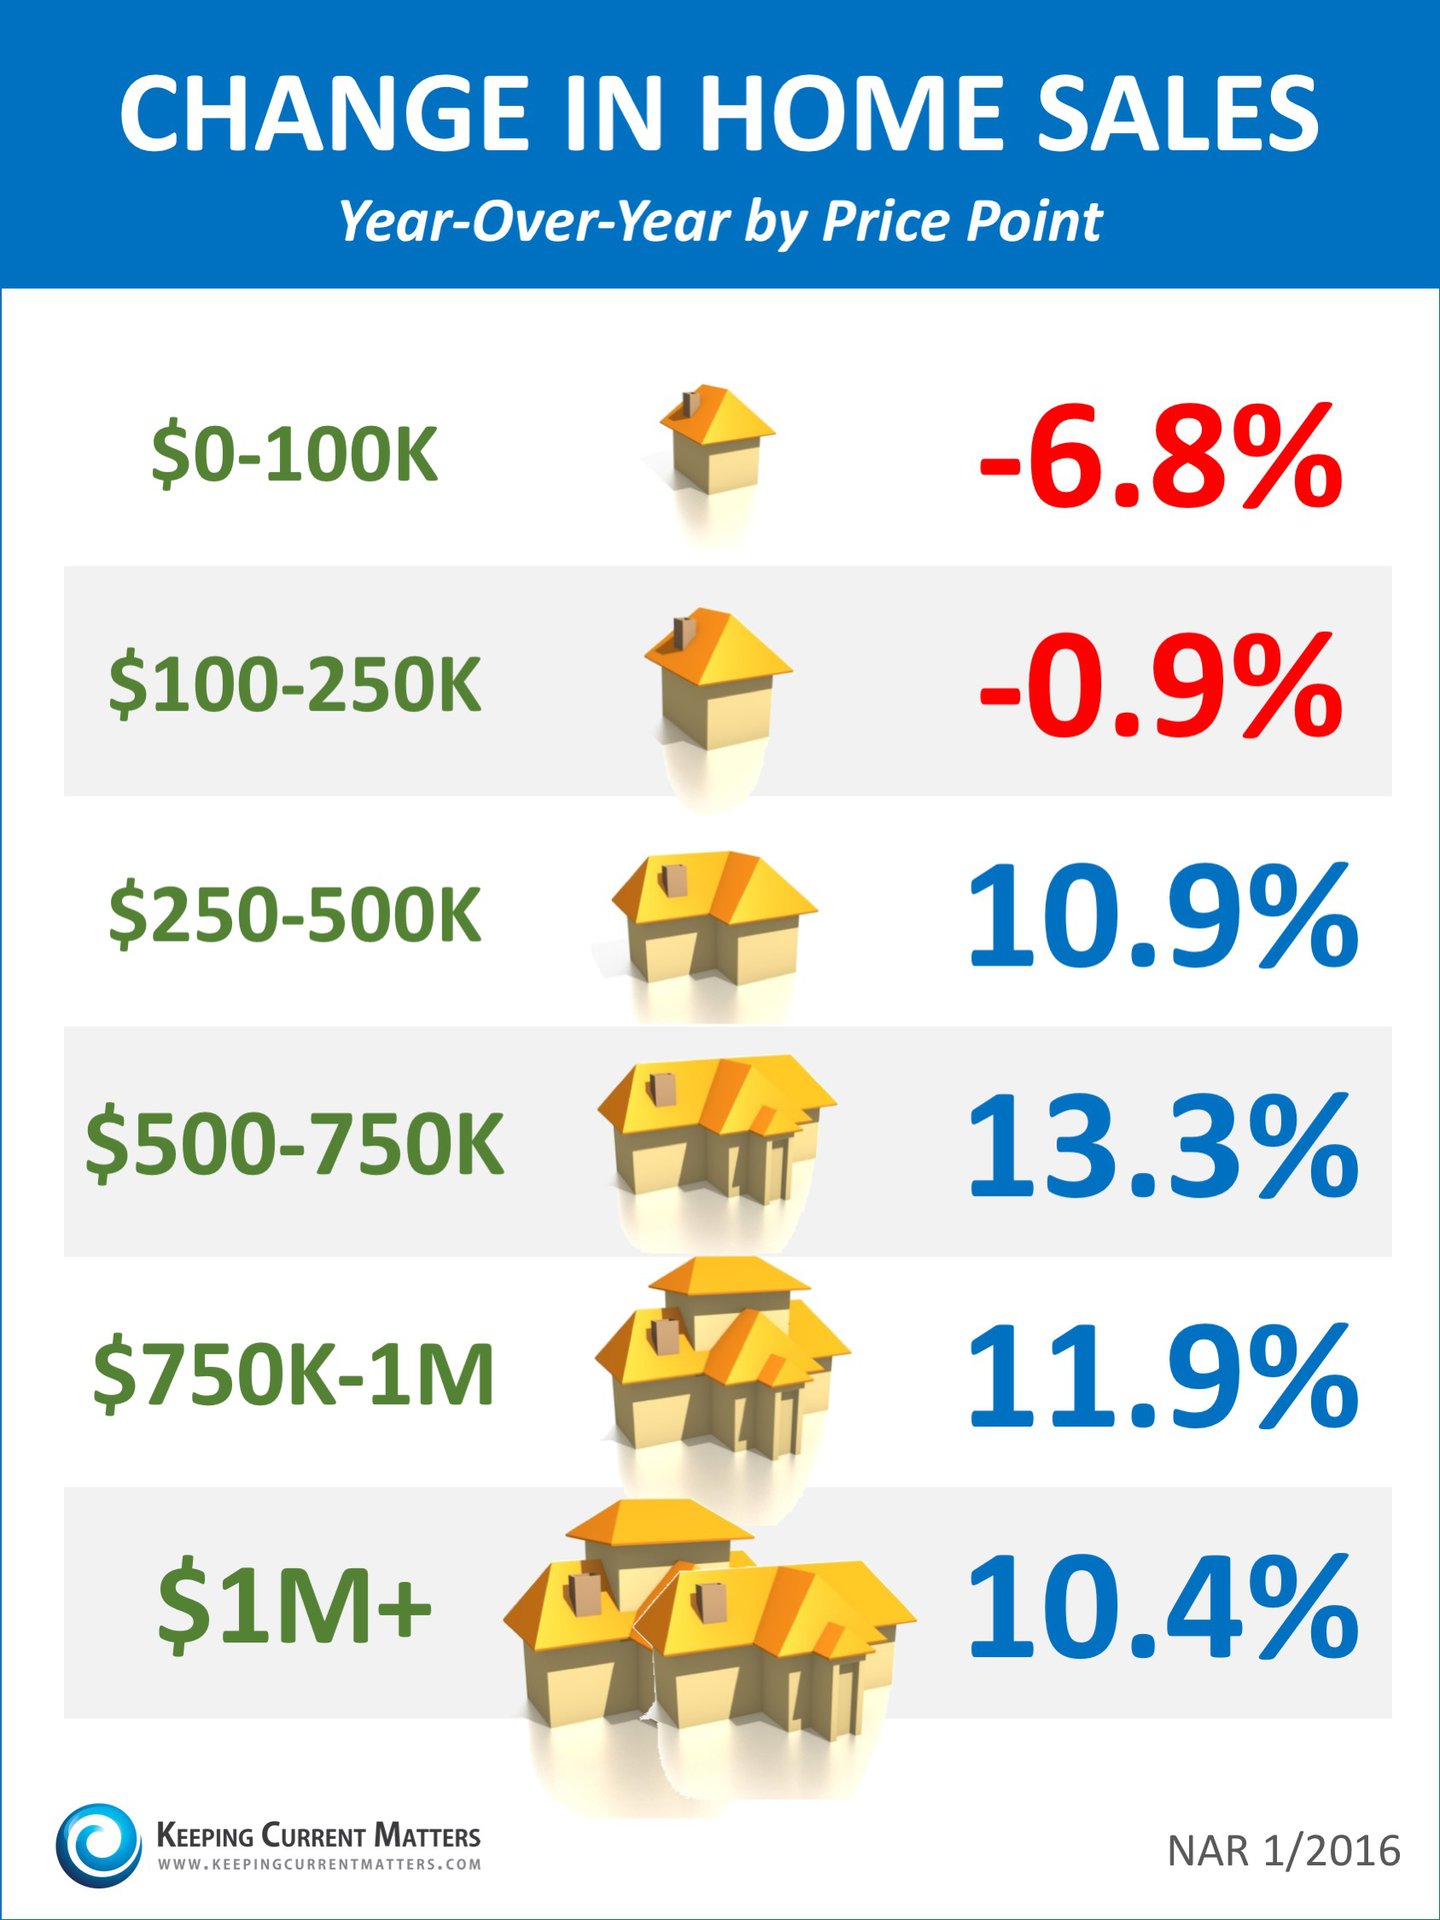 Change In Home Sales By Price Range [INFOGRAPHIC] | Keeping Current Matters